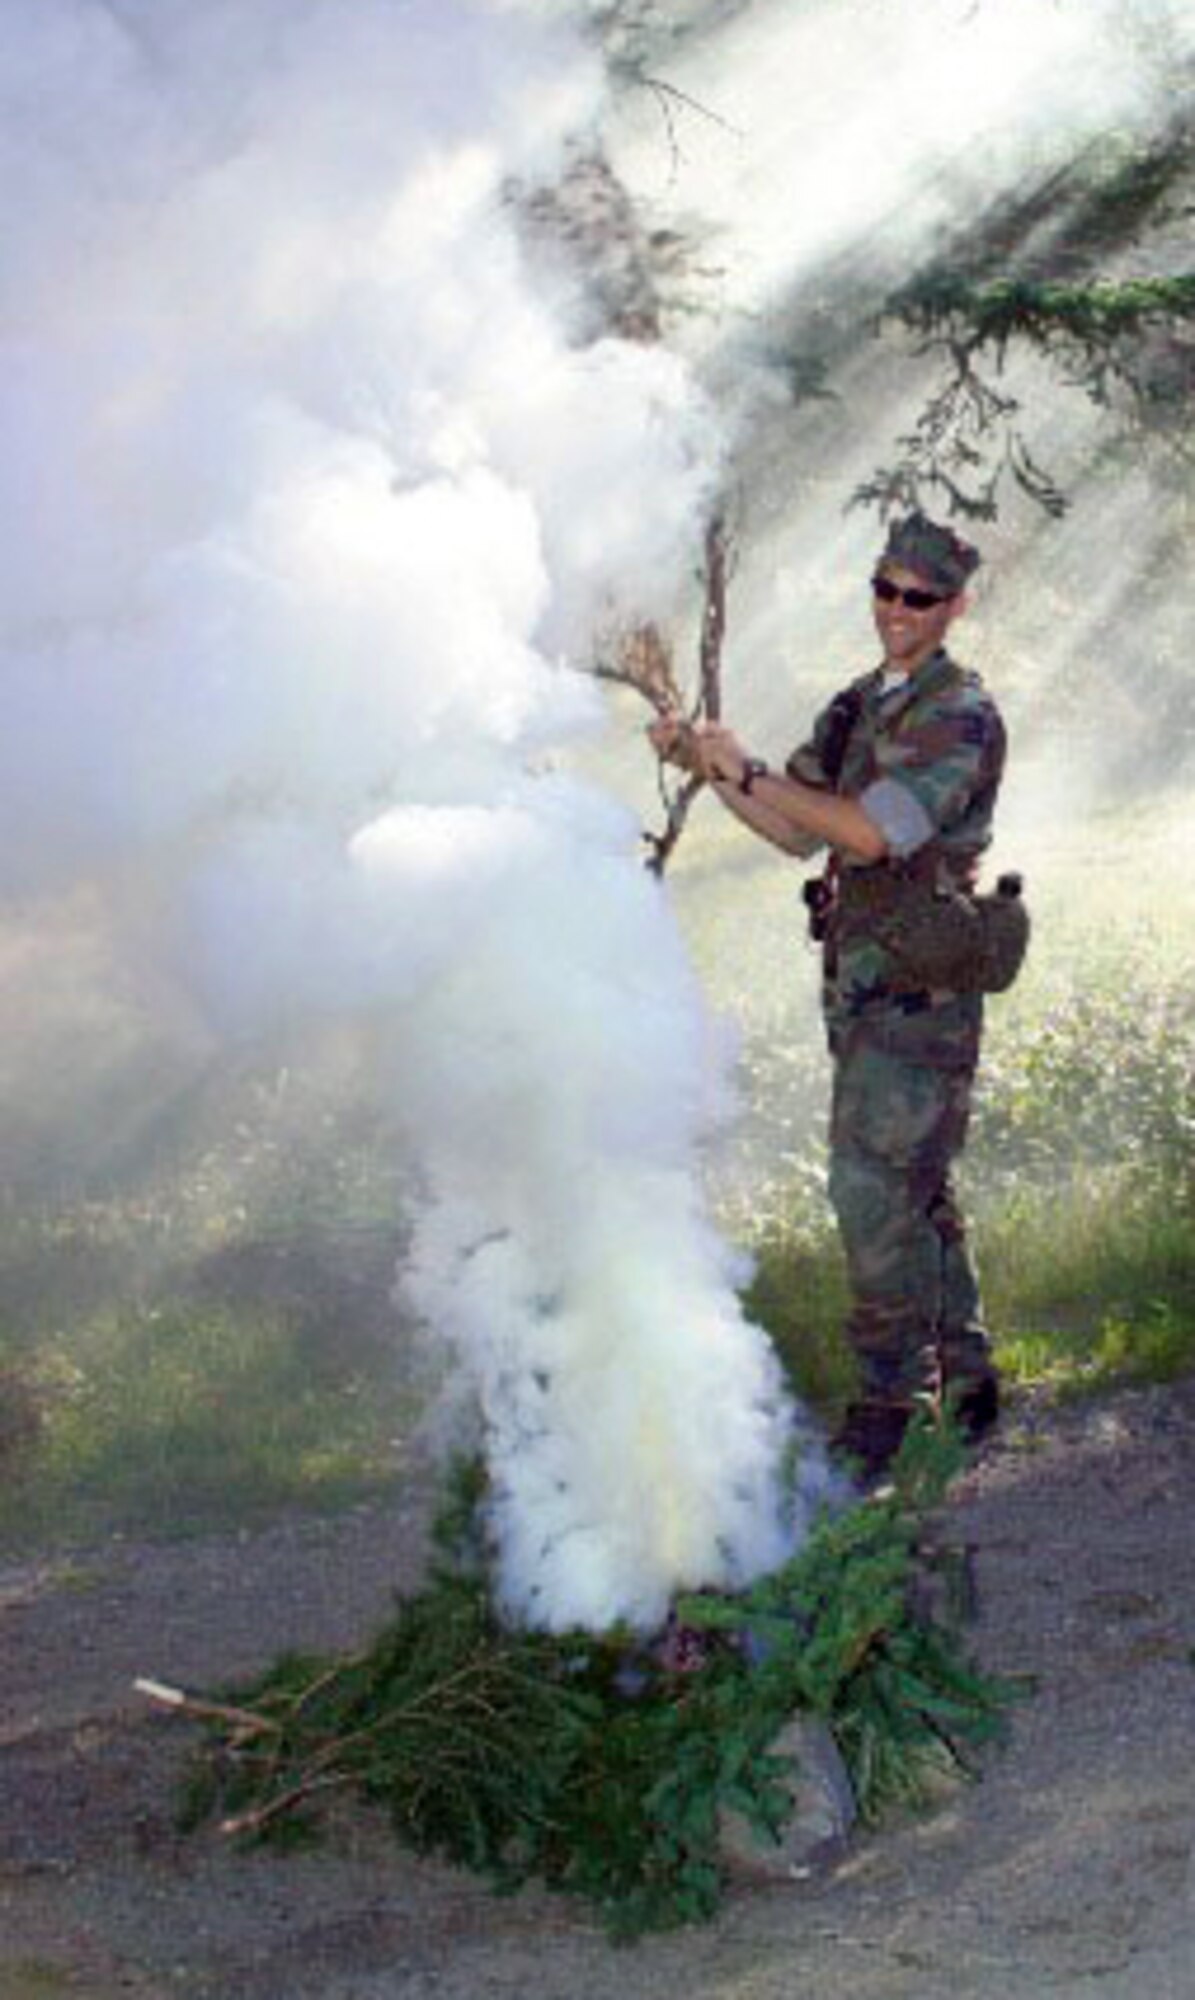 NASA astronaut candidate James Dutton Jr. builds a signal fire during 2004 ASCAN land survival training in the wilderness of Maine. (NASA courtesy image)